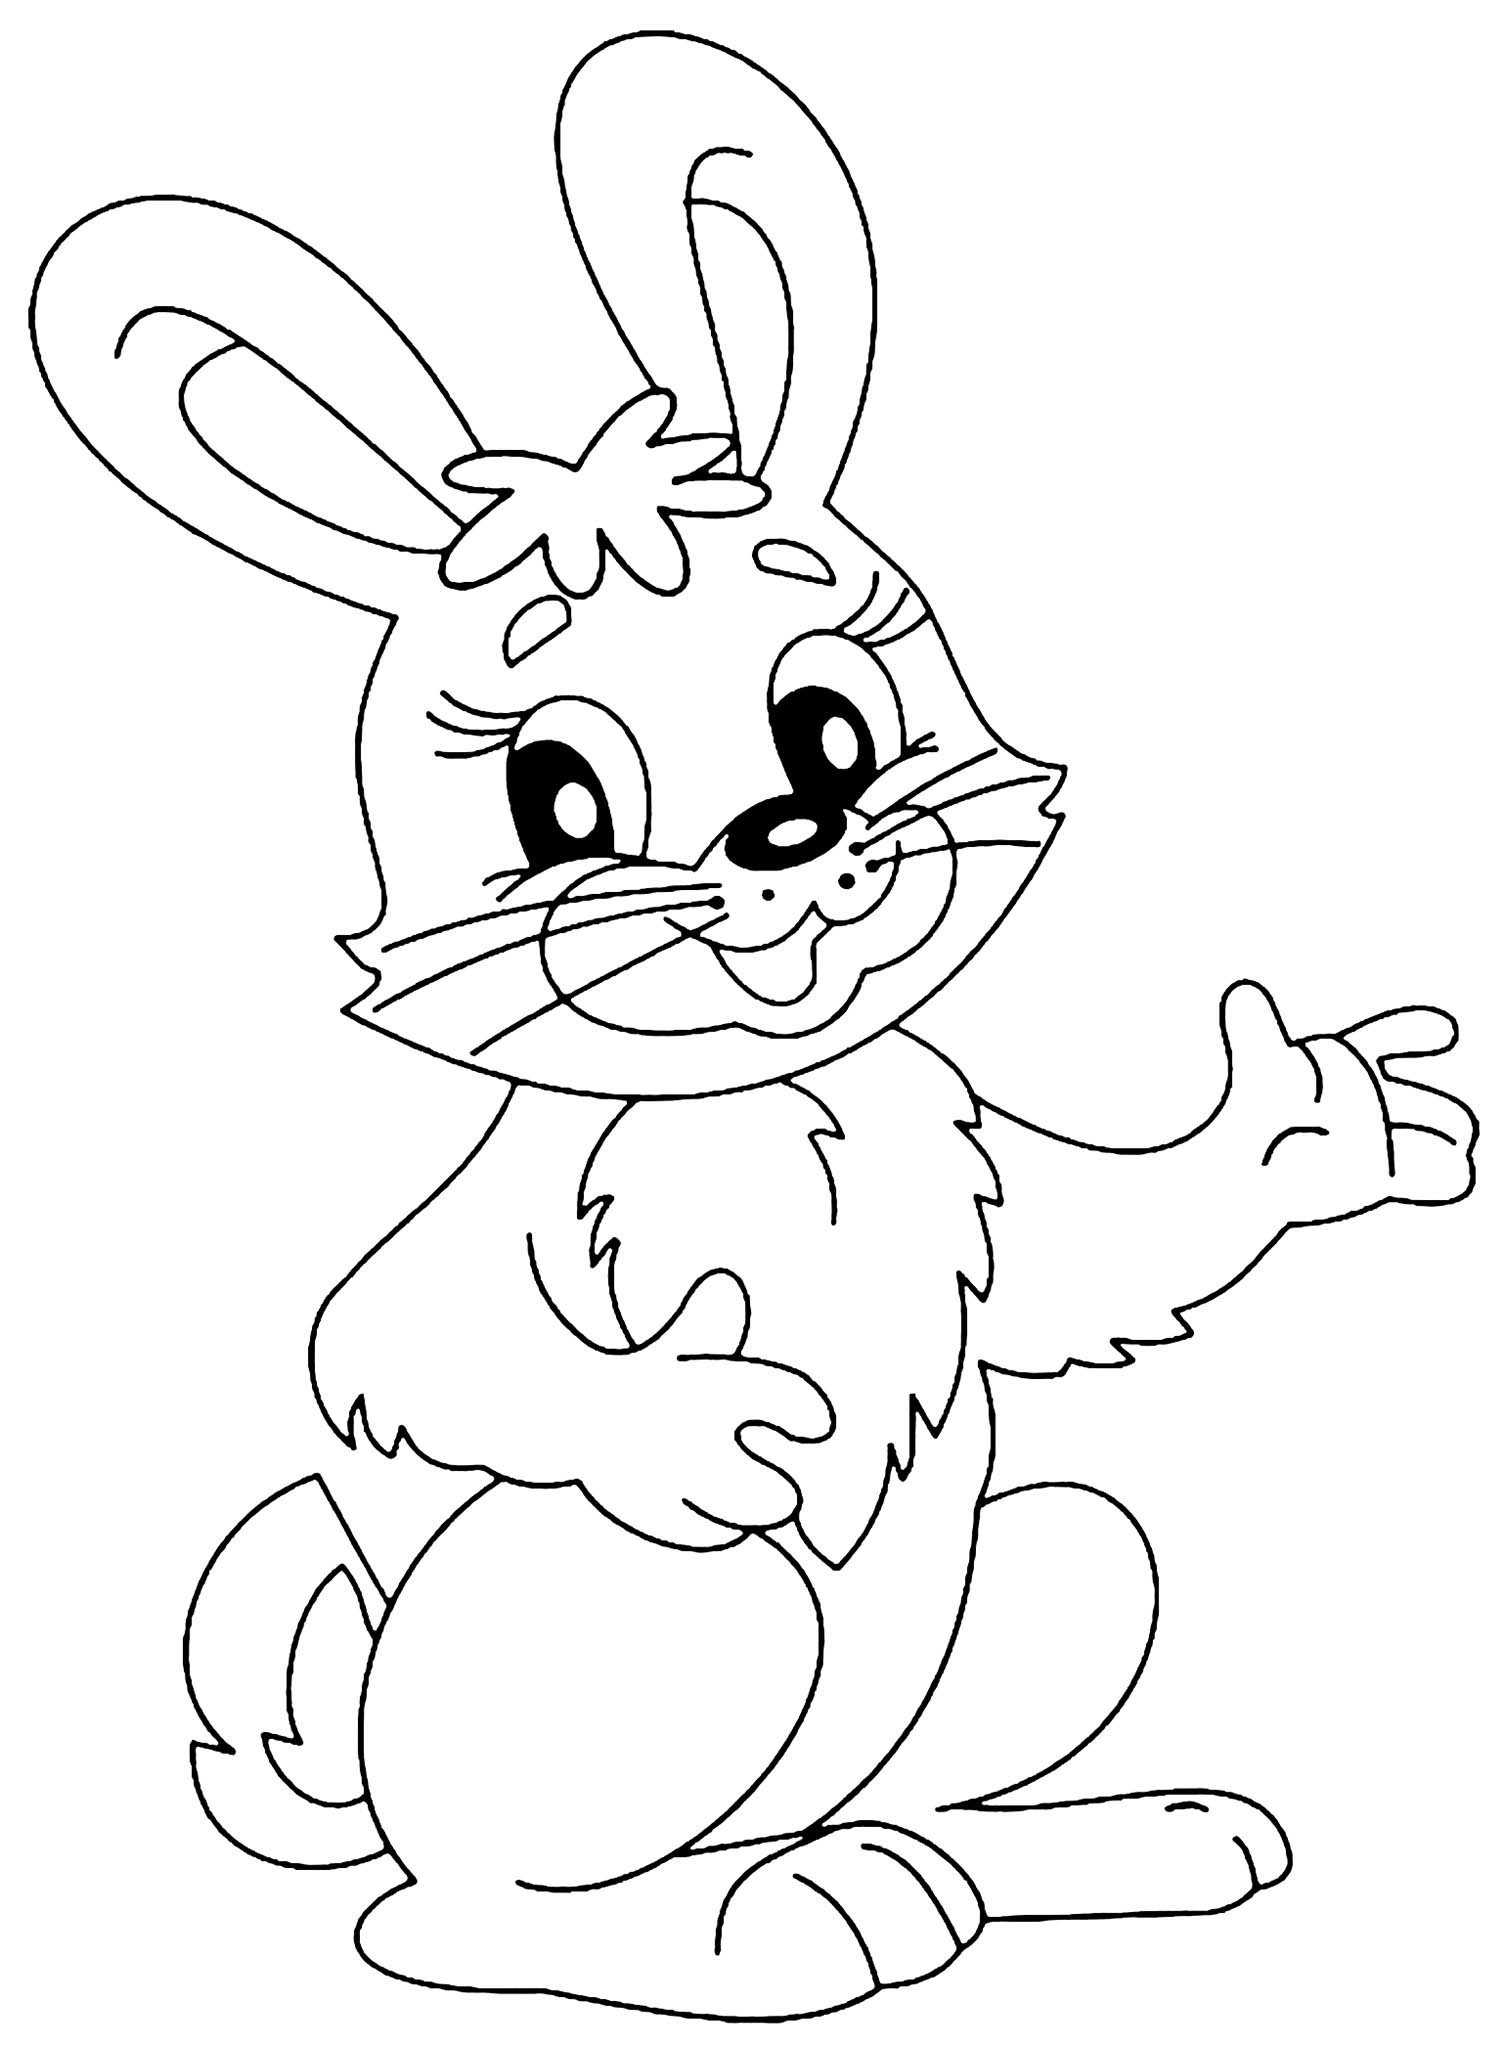 Download Rabbit to color for children - Rabbit Kids Coloring Pages